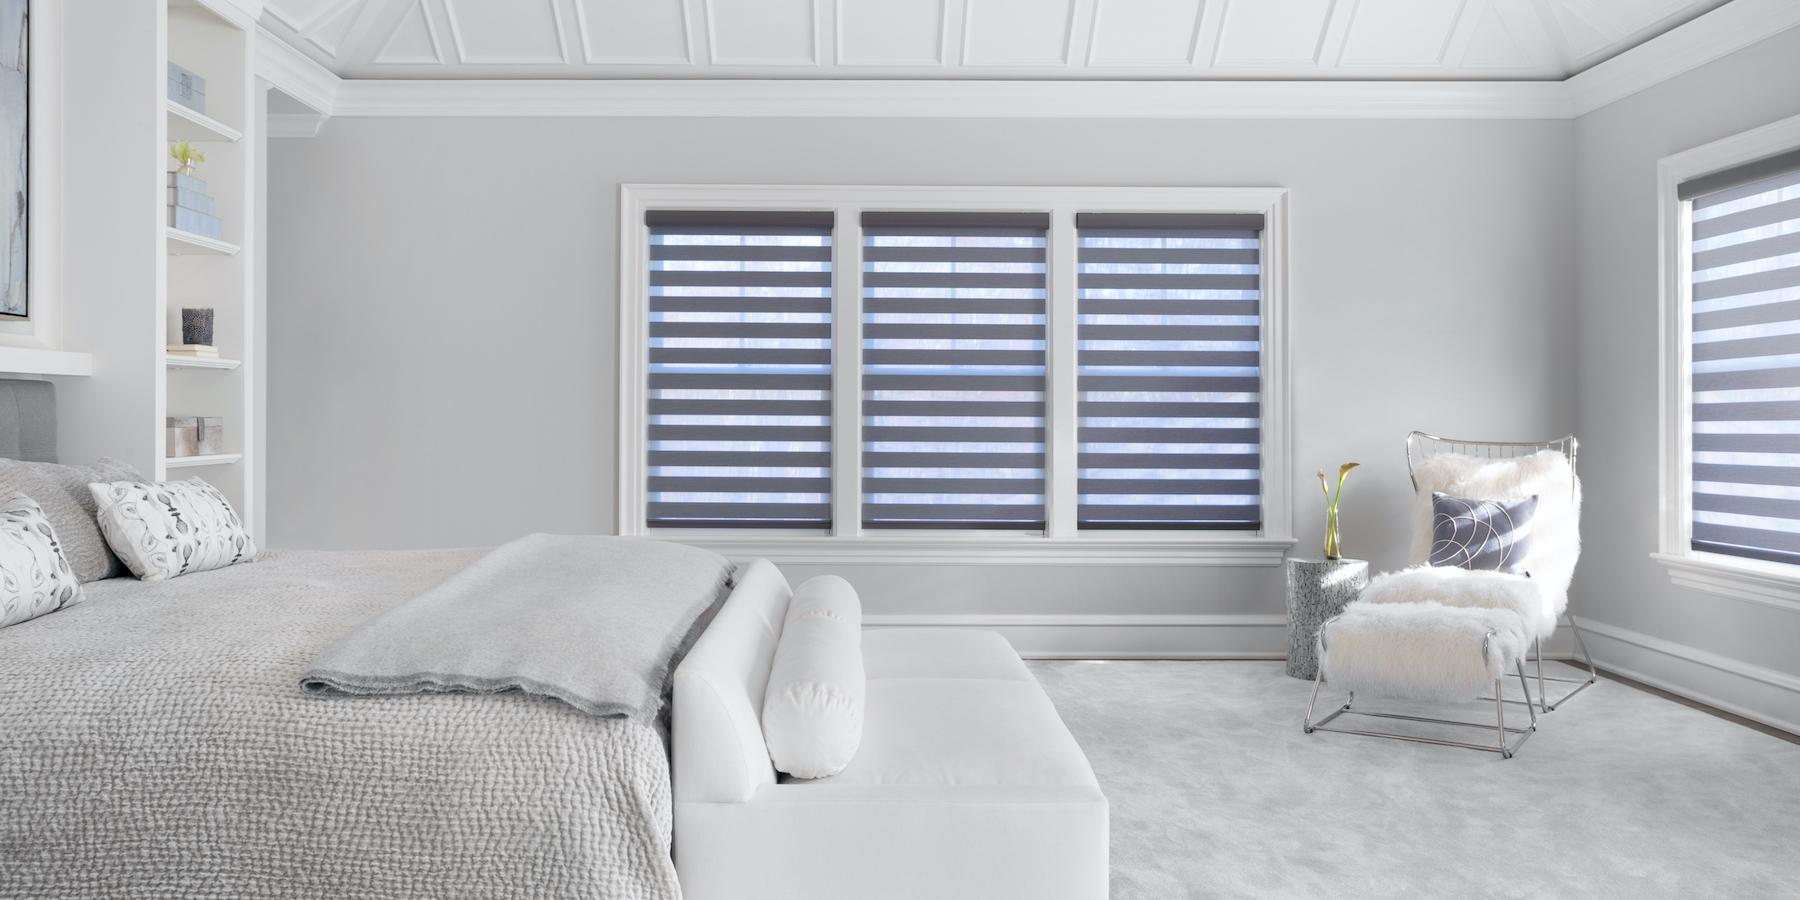 Cascade shades come in a variety of beautifully styled fabrics, which will bring an air of elegance into any room